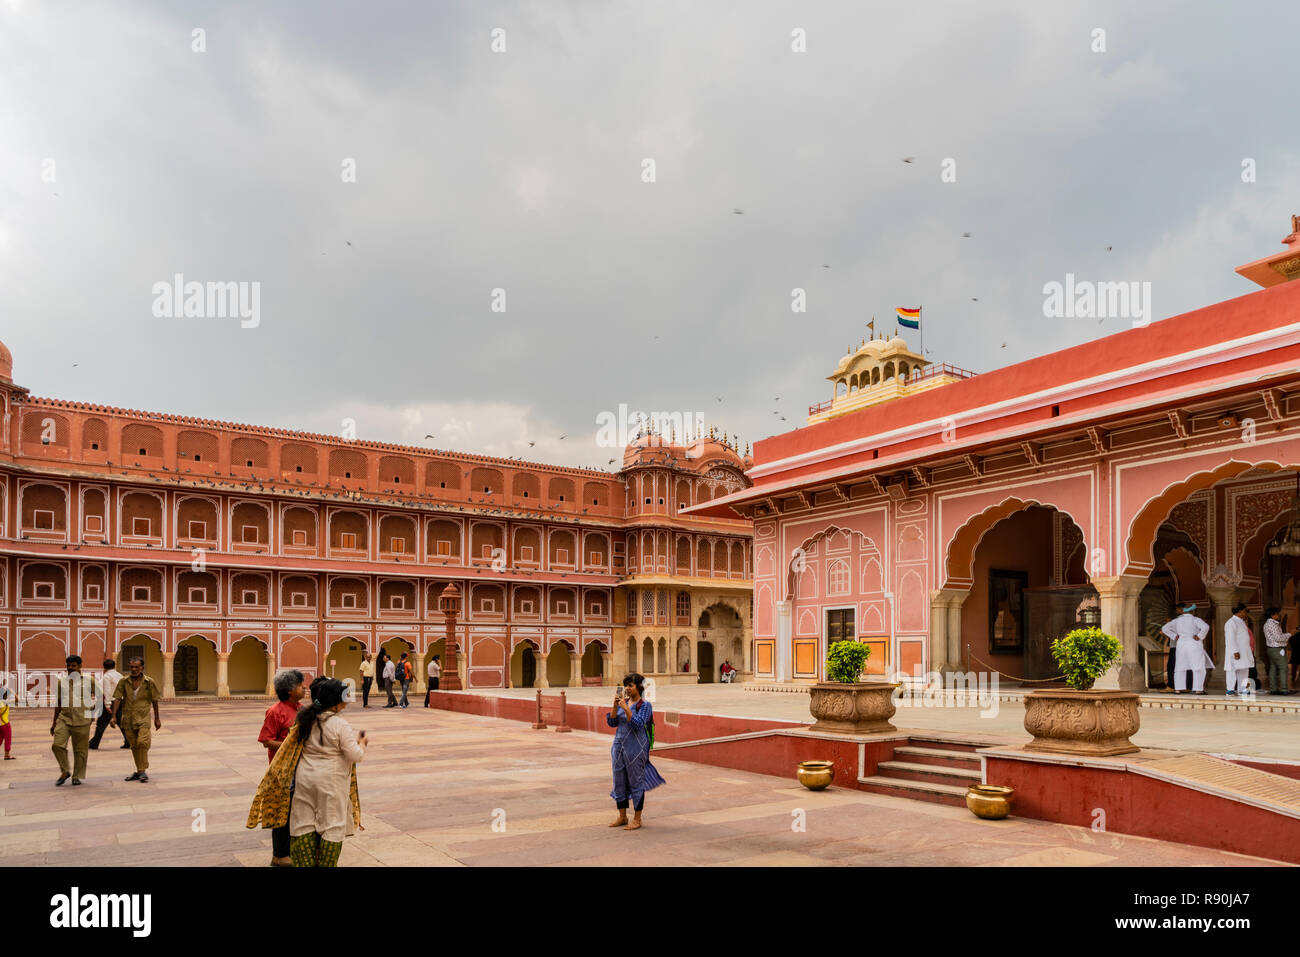 The Golden Triangle cities of Delhi, Agra, and Jaipur in Northern India Stock Photo